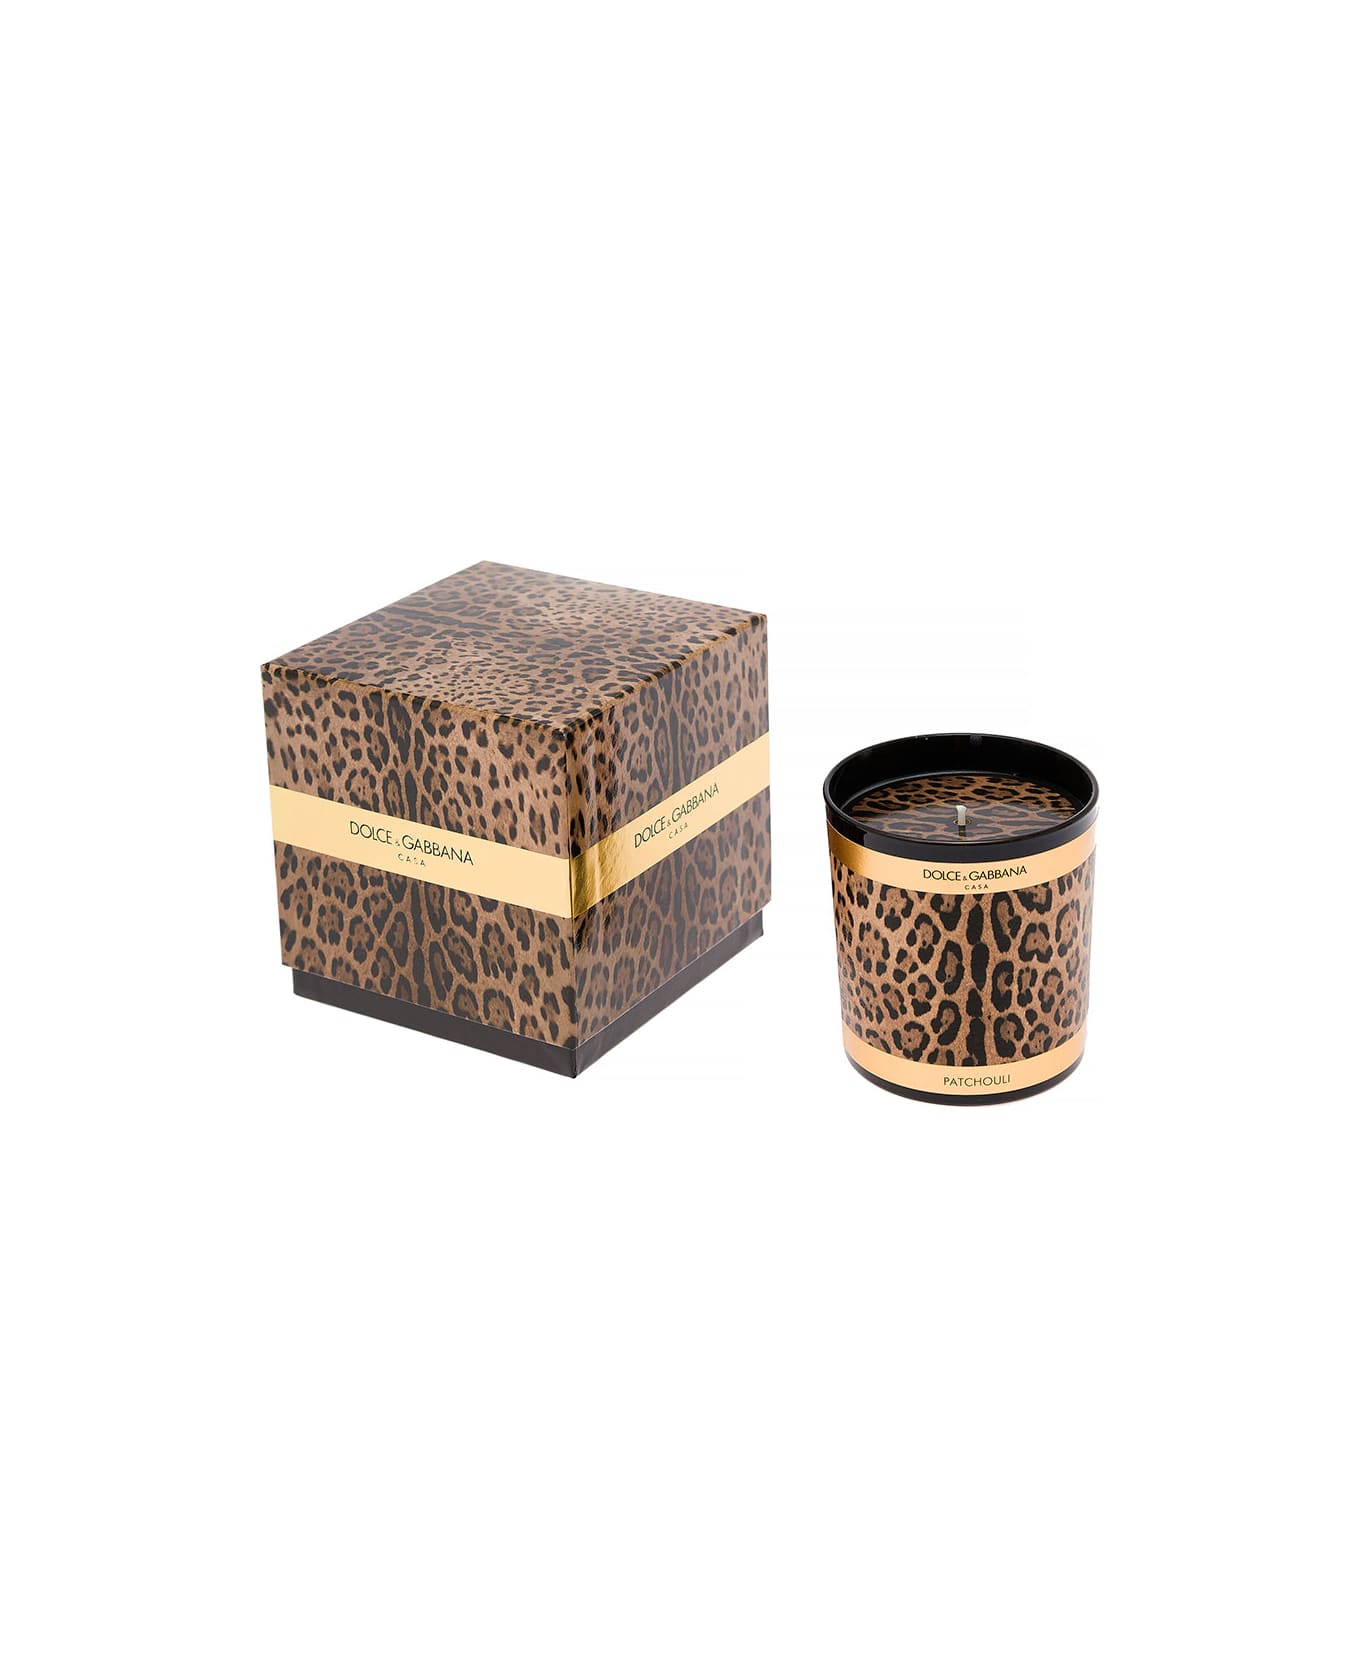 Dolce & Gabbana Patchouli Scented Candle With Leopard Print - Multicolor